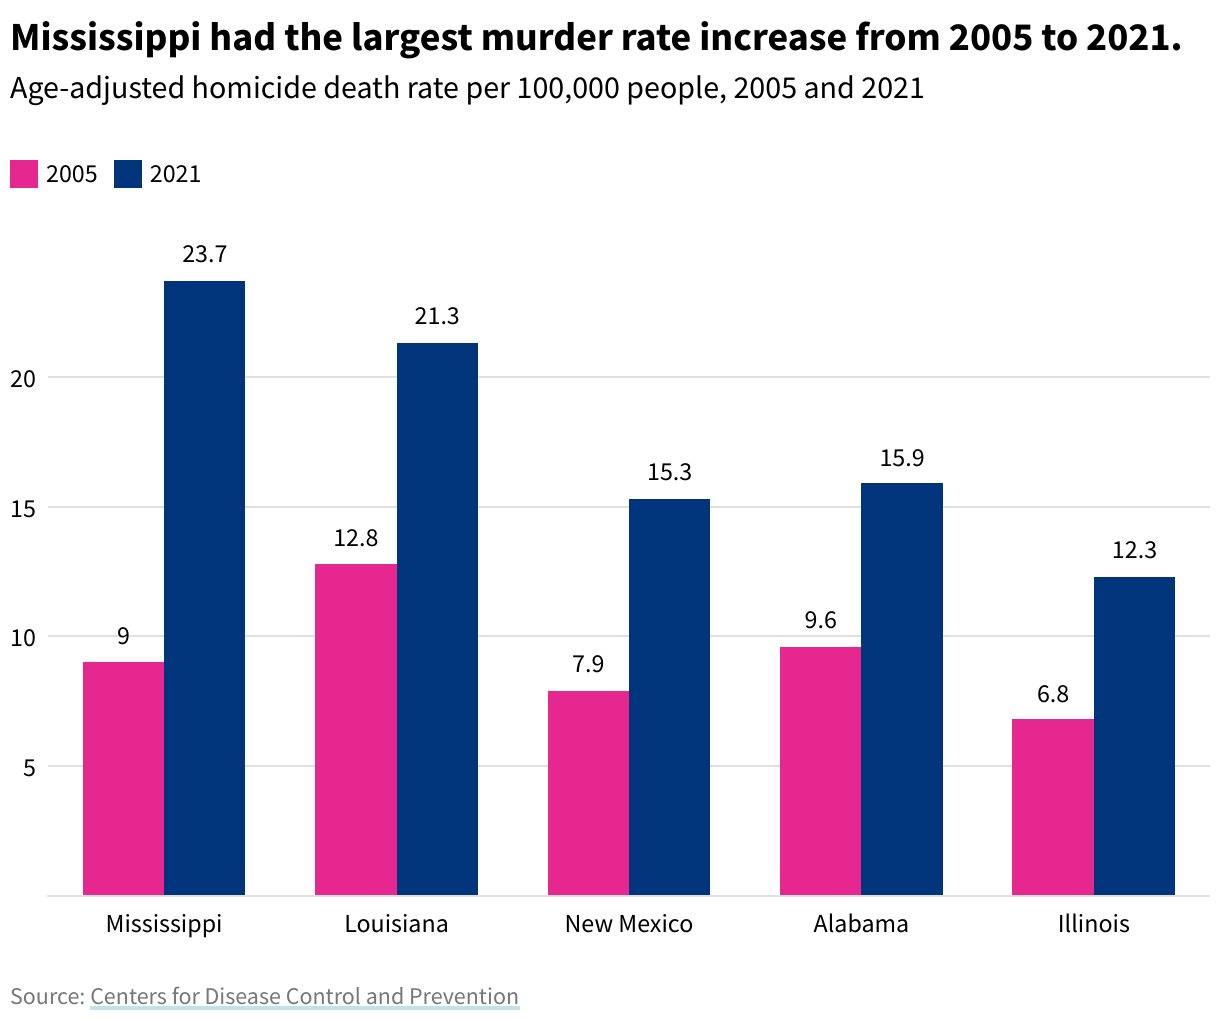 Grouped bar chart showing the murder rates for the five states with the largest increase from 2005 to 2021. In order, they are Mississippi, Louisiana, New Mexico, Alabama, and Illinois.